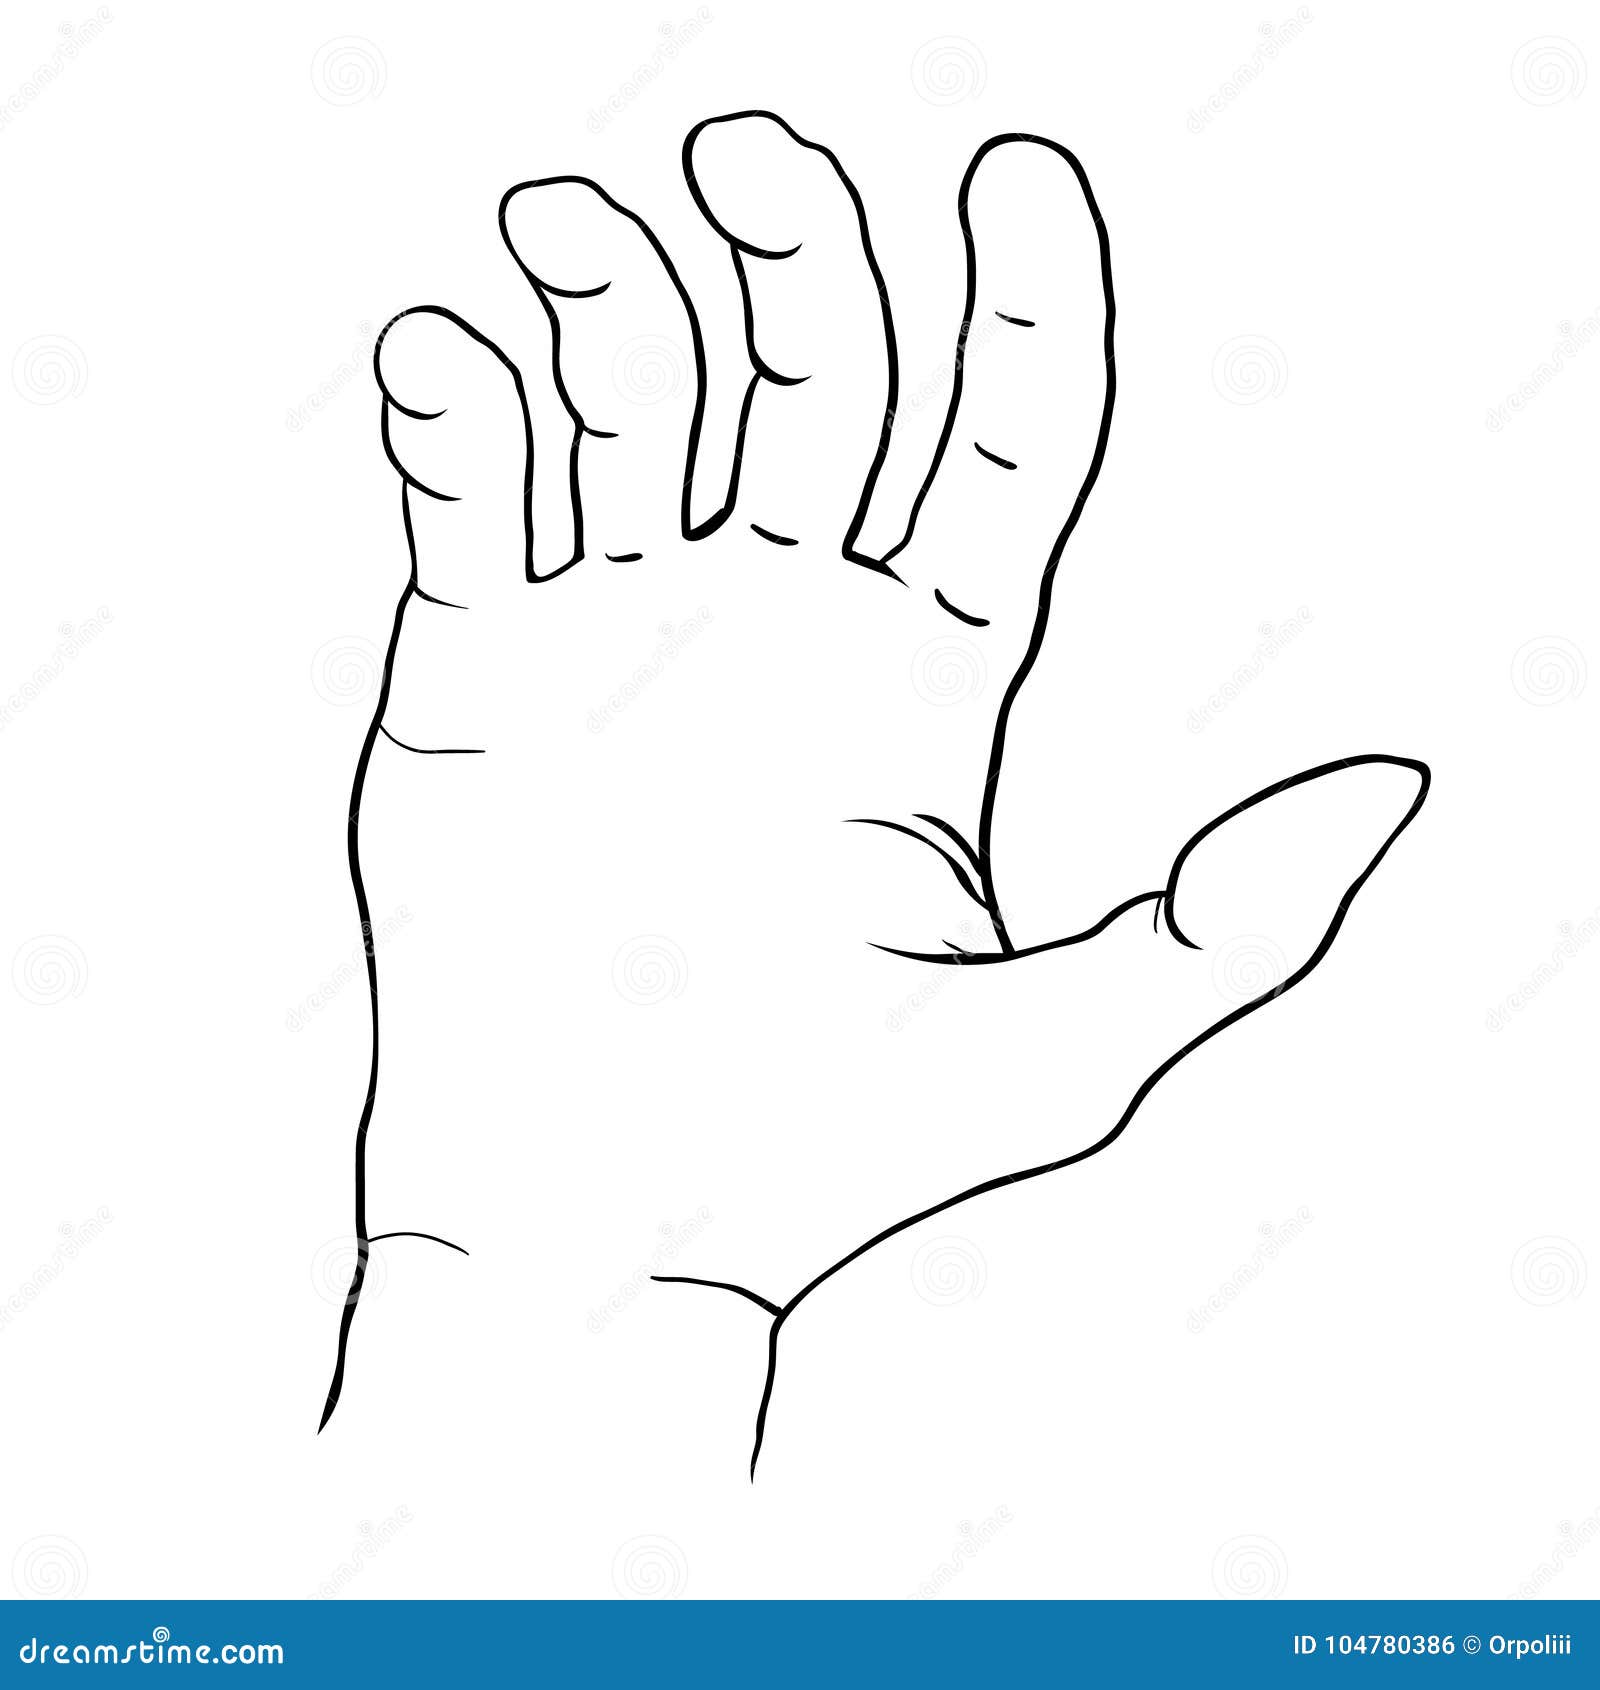 Coloring Hand Male Bent Fingers Palm. Vector Illustration ...